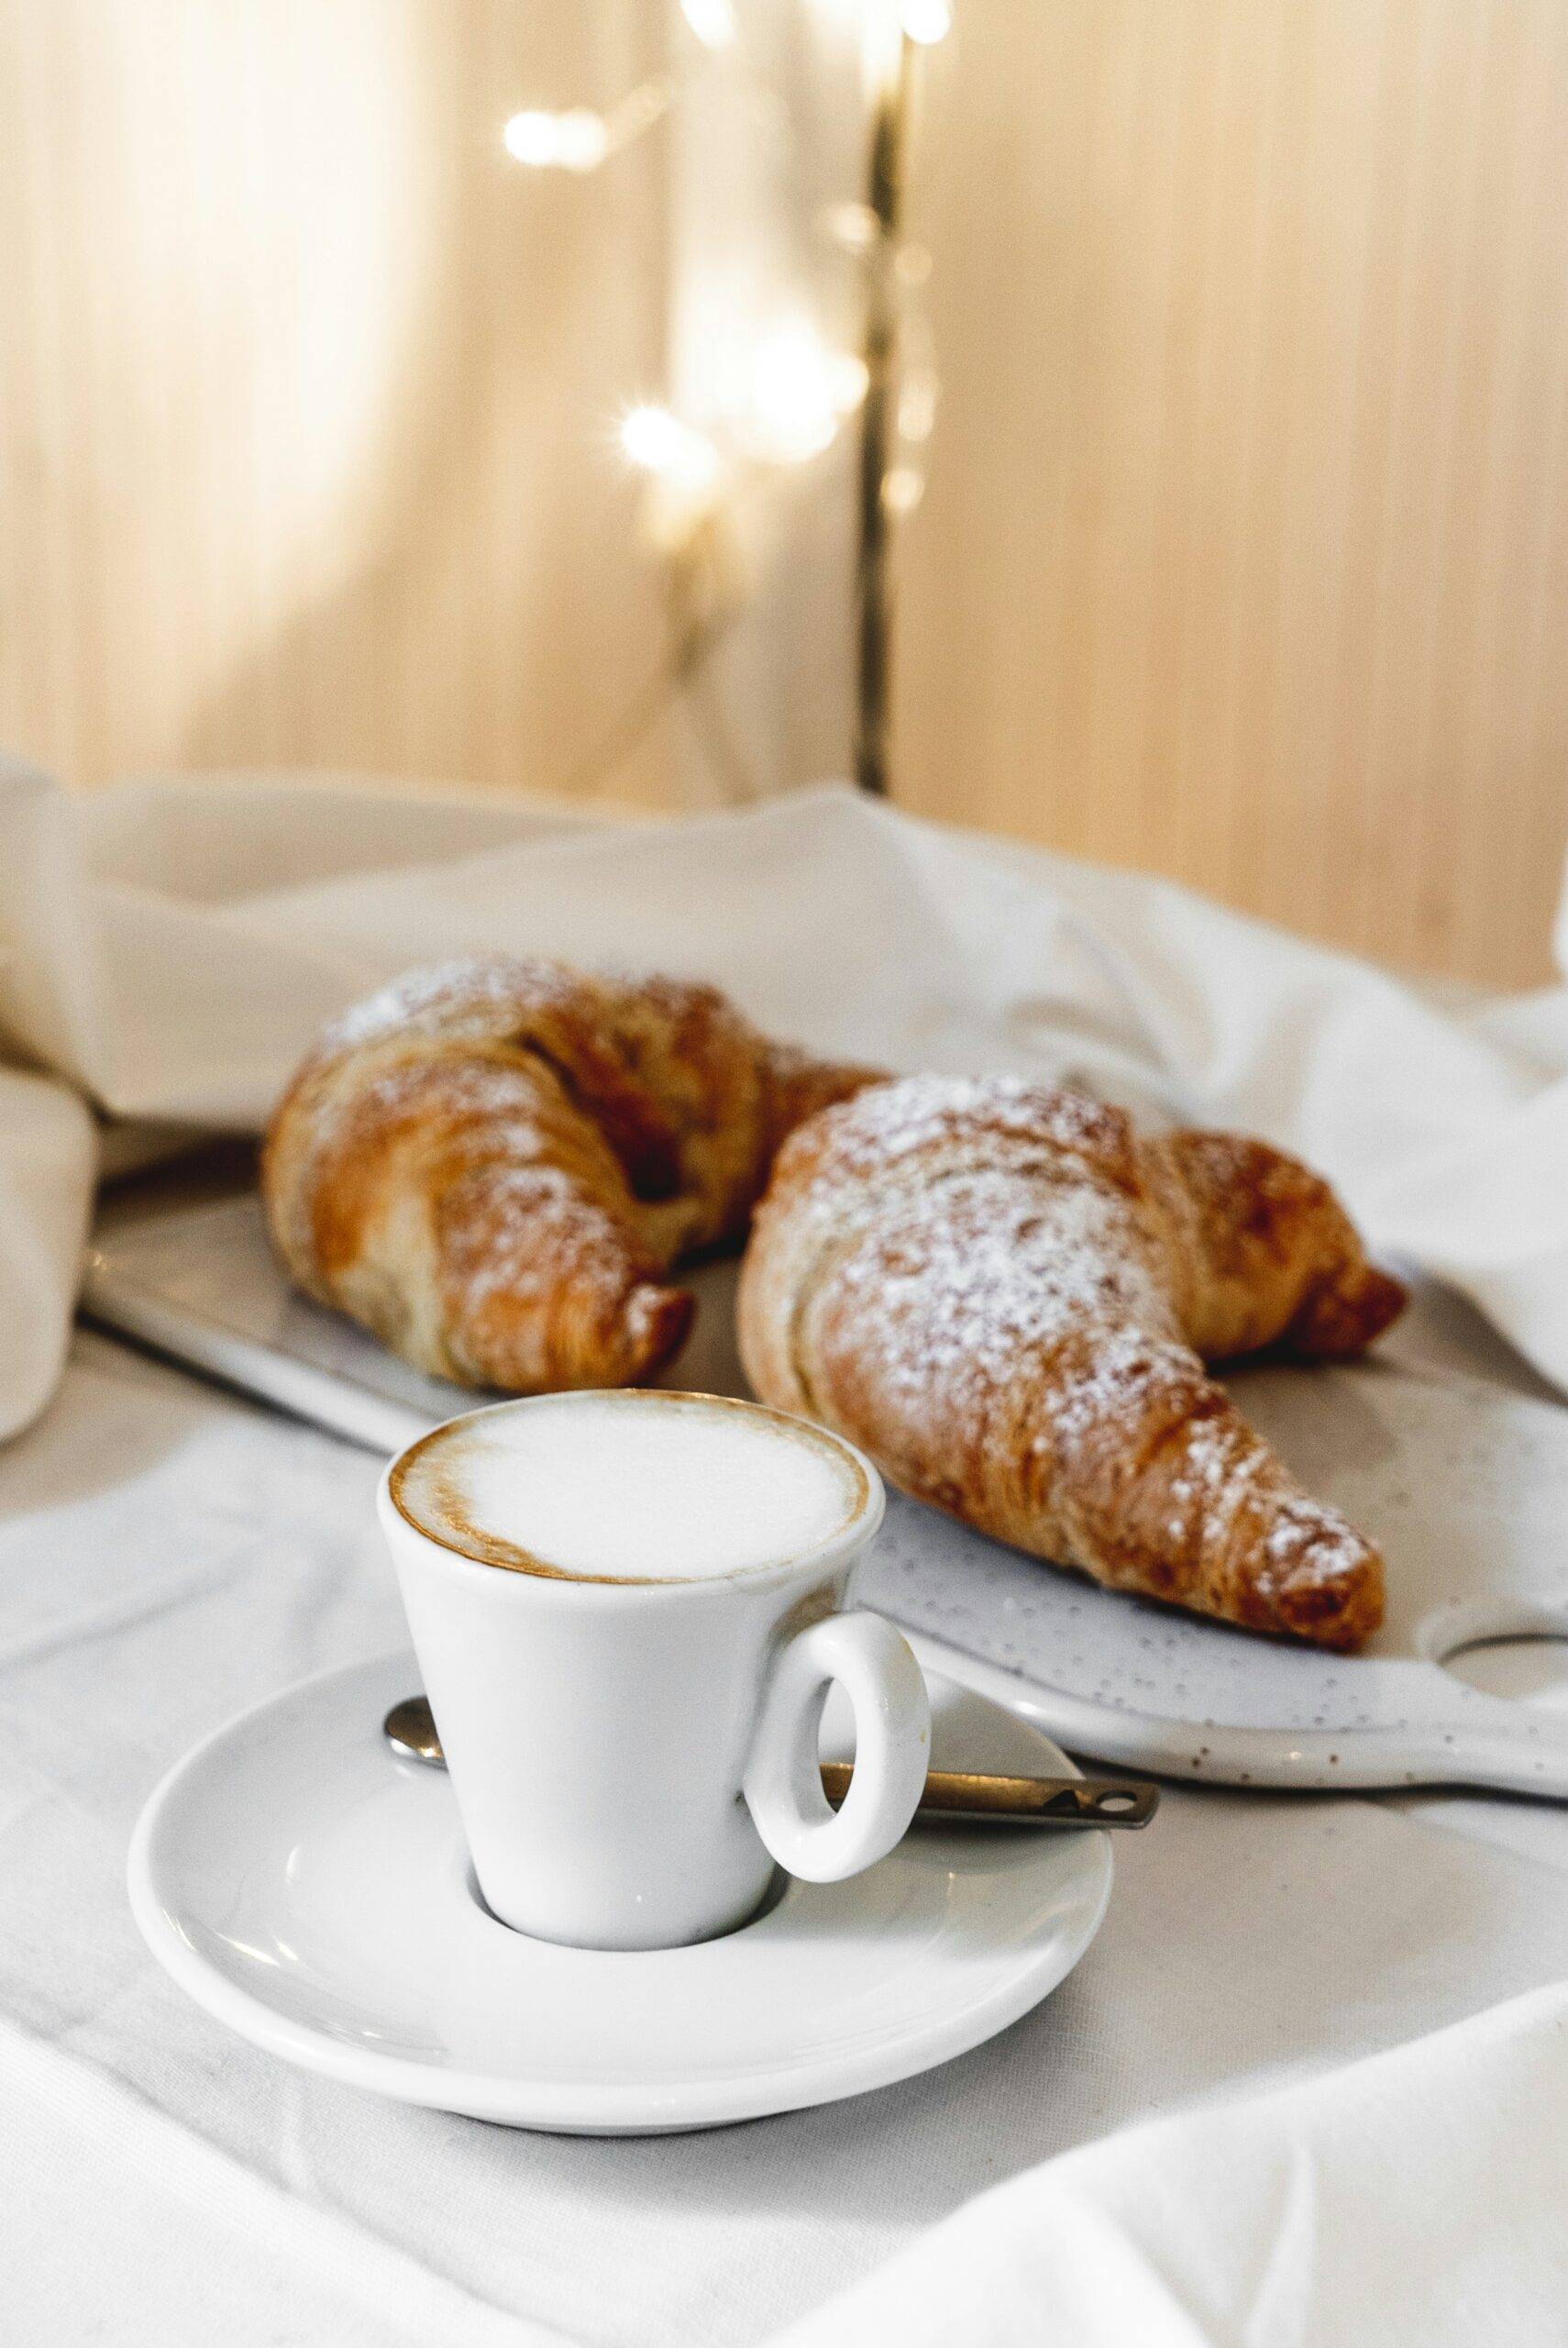 Popular Italian Coffee Culture And Traditions